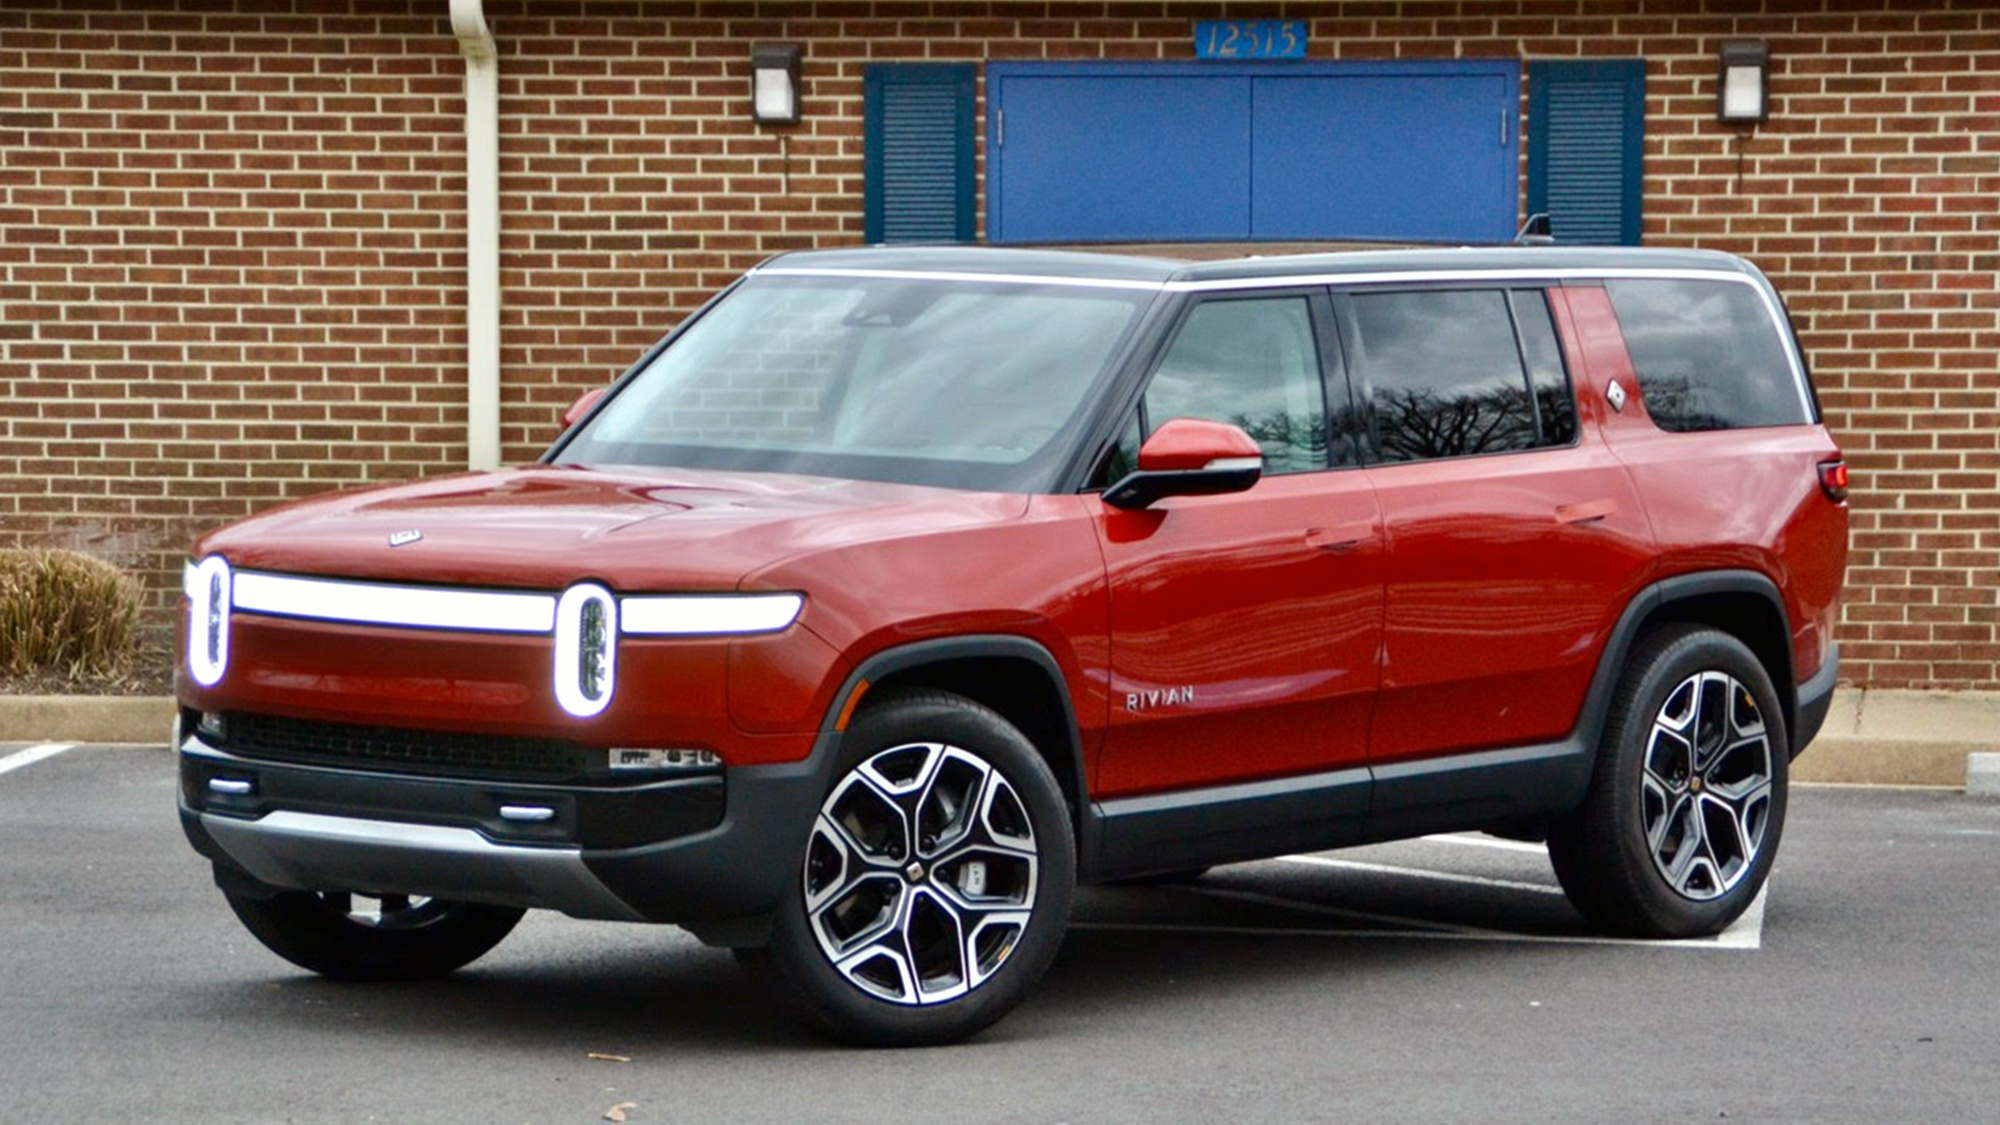 Rivian Max Pack doesn't deliver much extra range in first real test